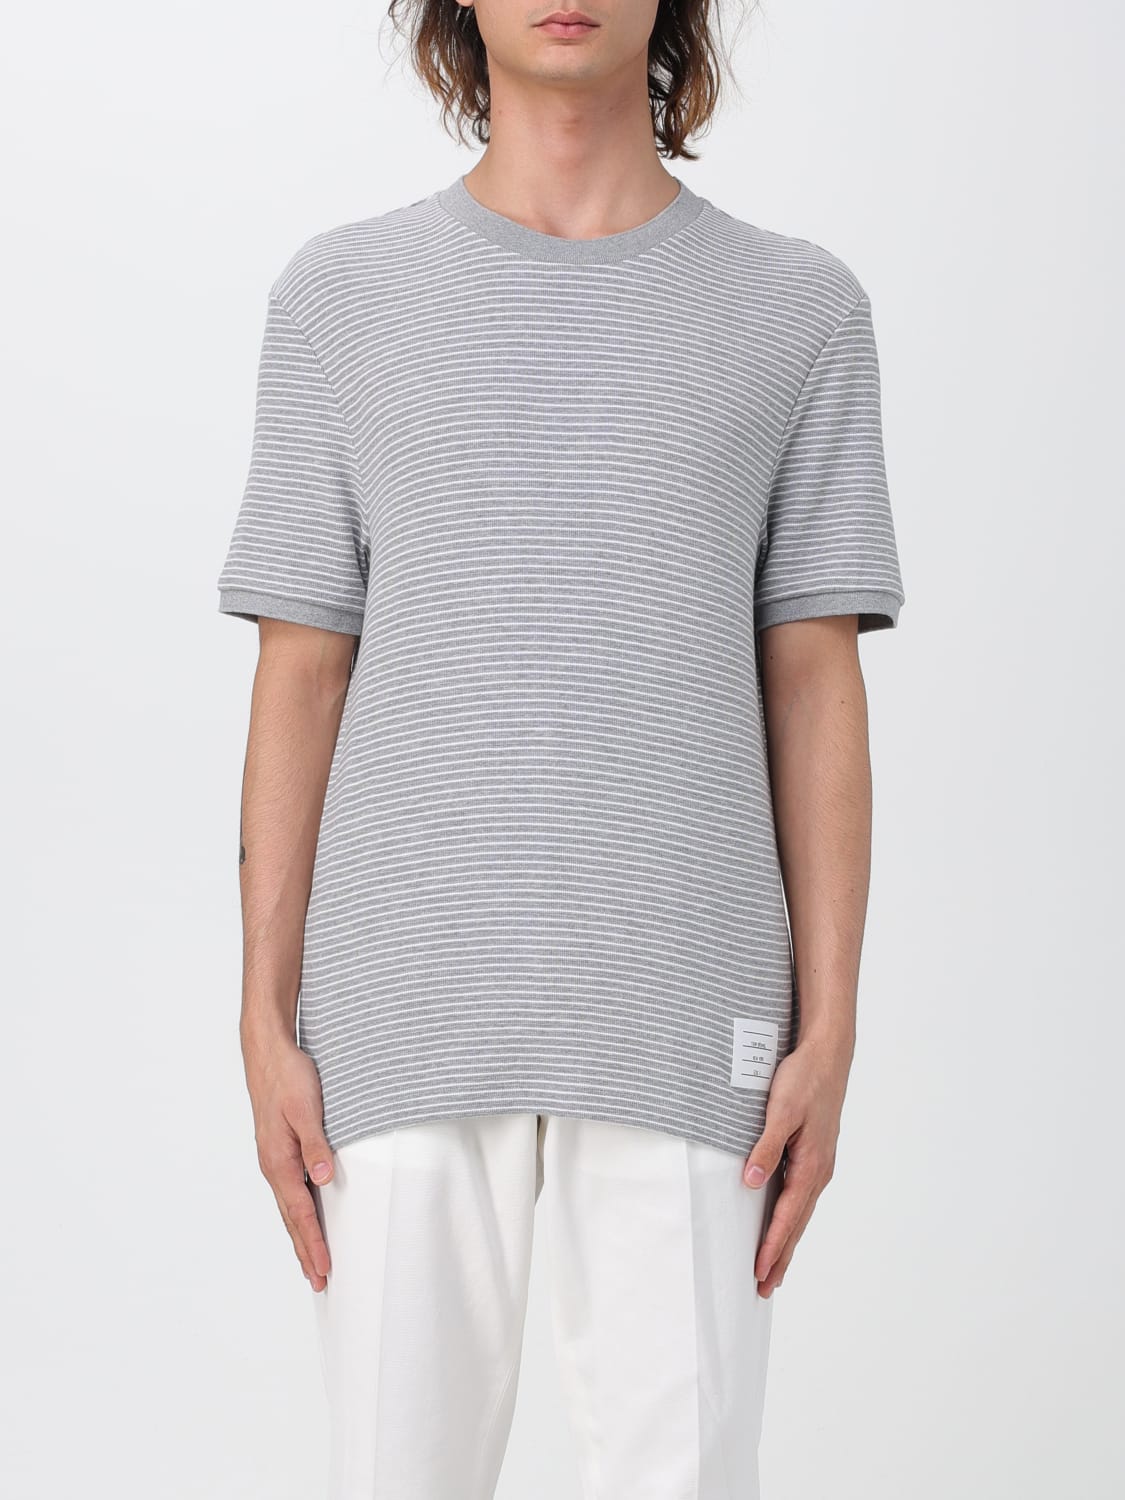 Best white T-shirt for men 2023: Uniqlo to Thom Browne